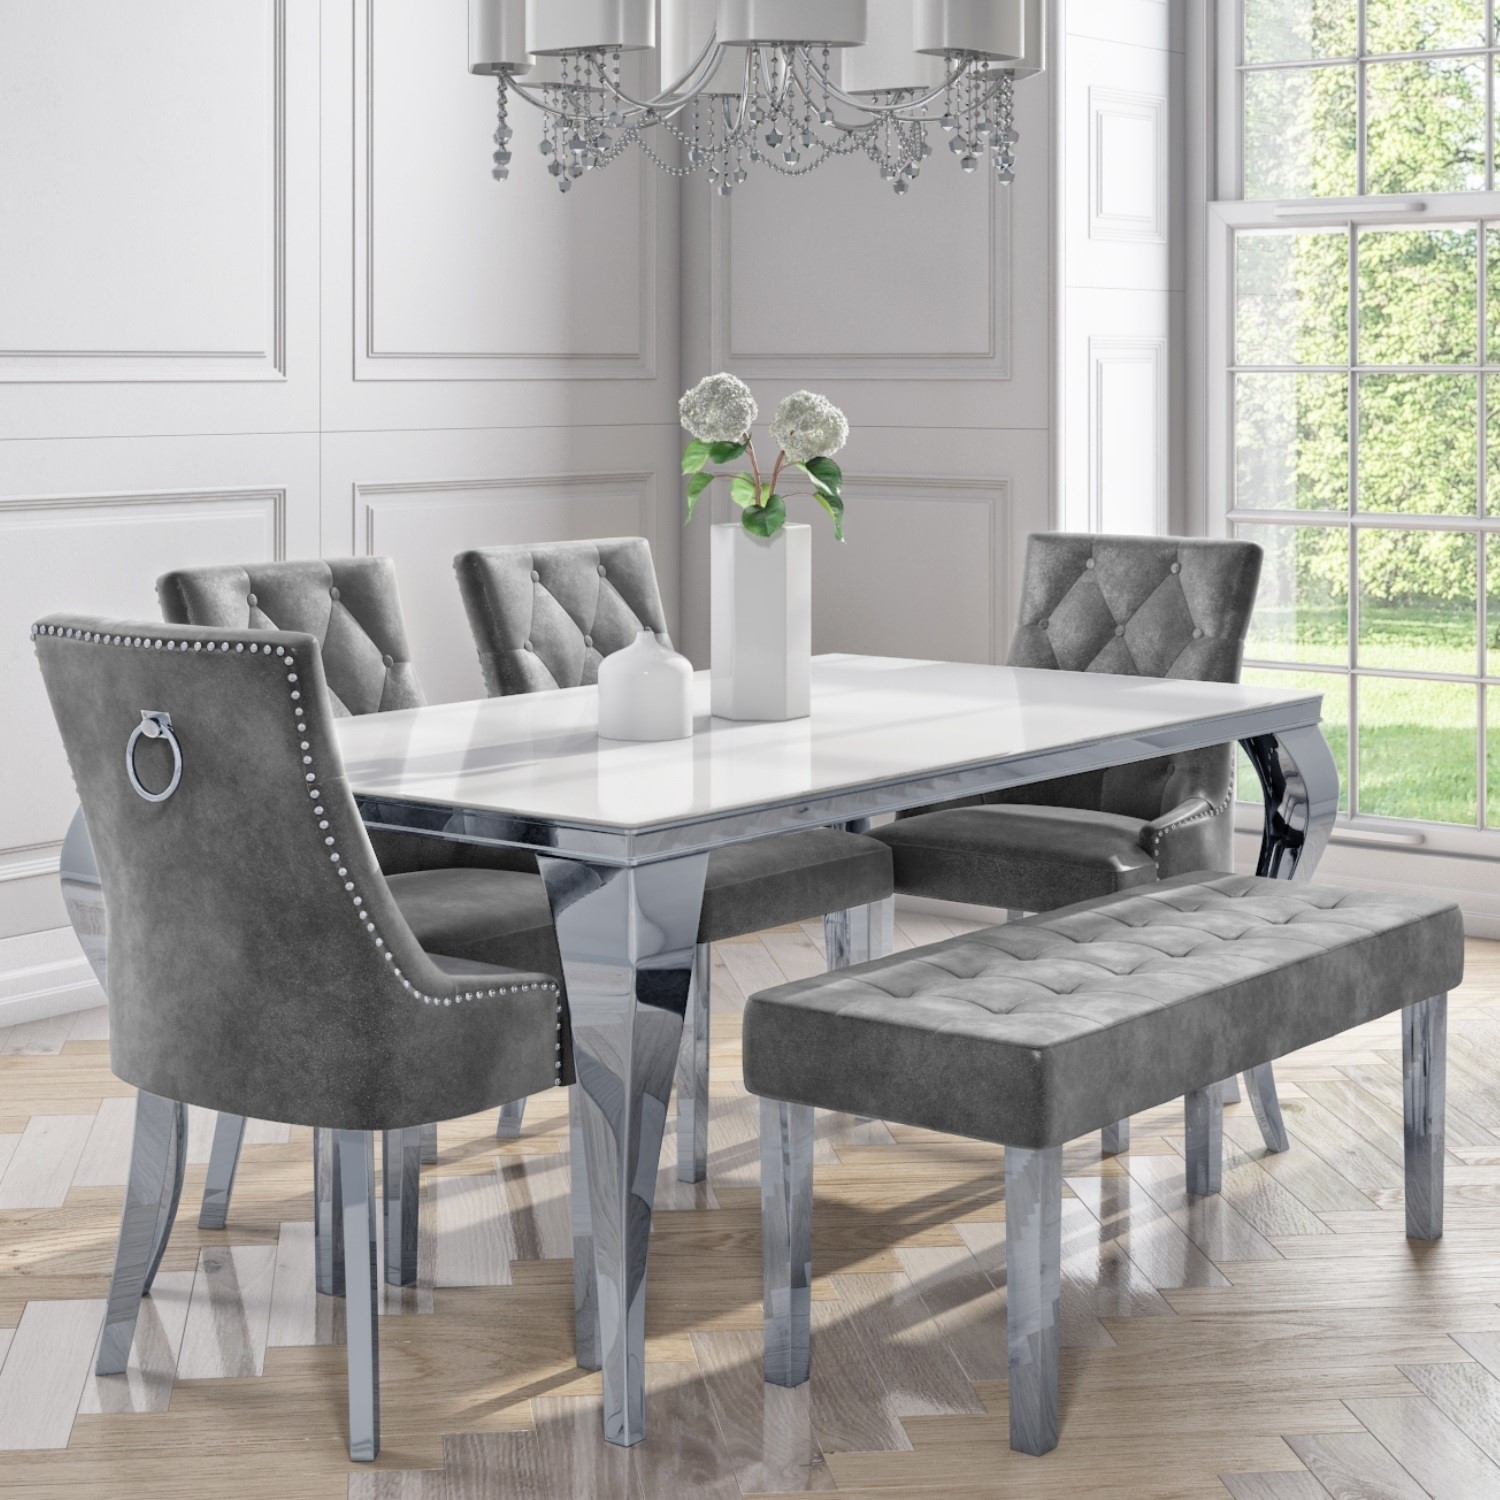 6 Seater Dining Set With White Table 4 Grey Velvet Chairs And 1 Bench Jade Boutique Furniture123